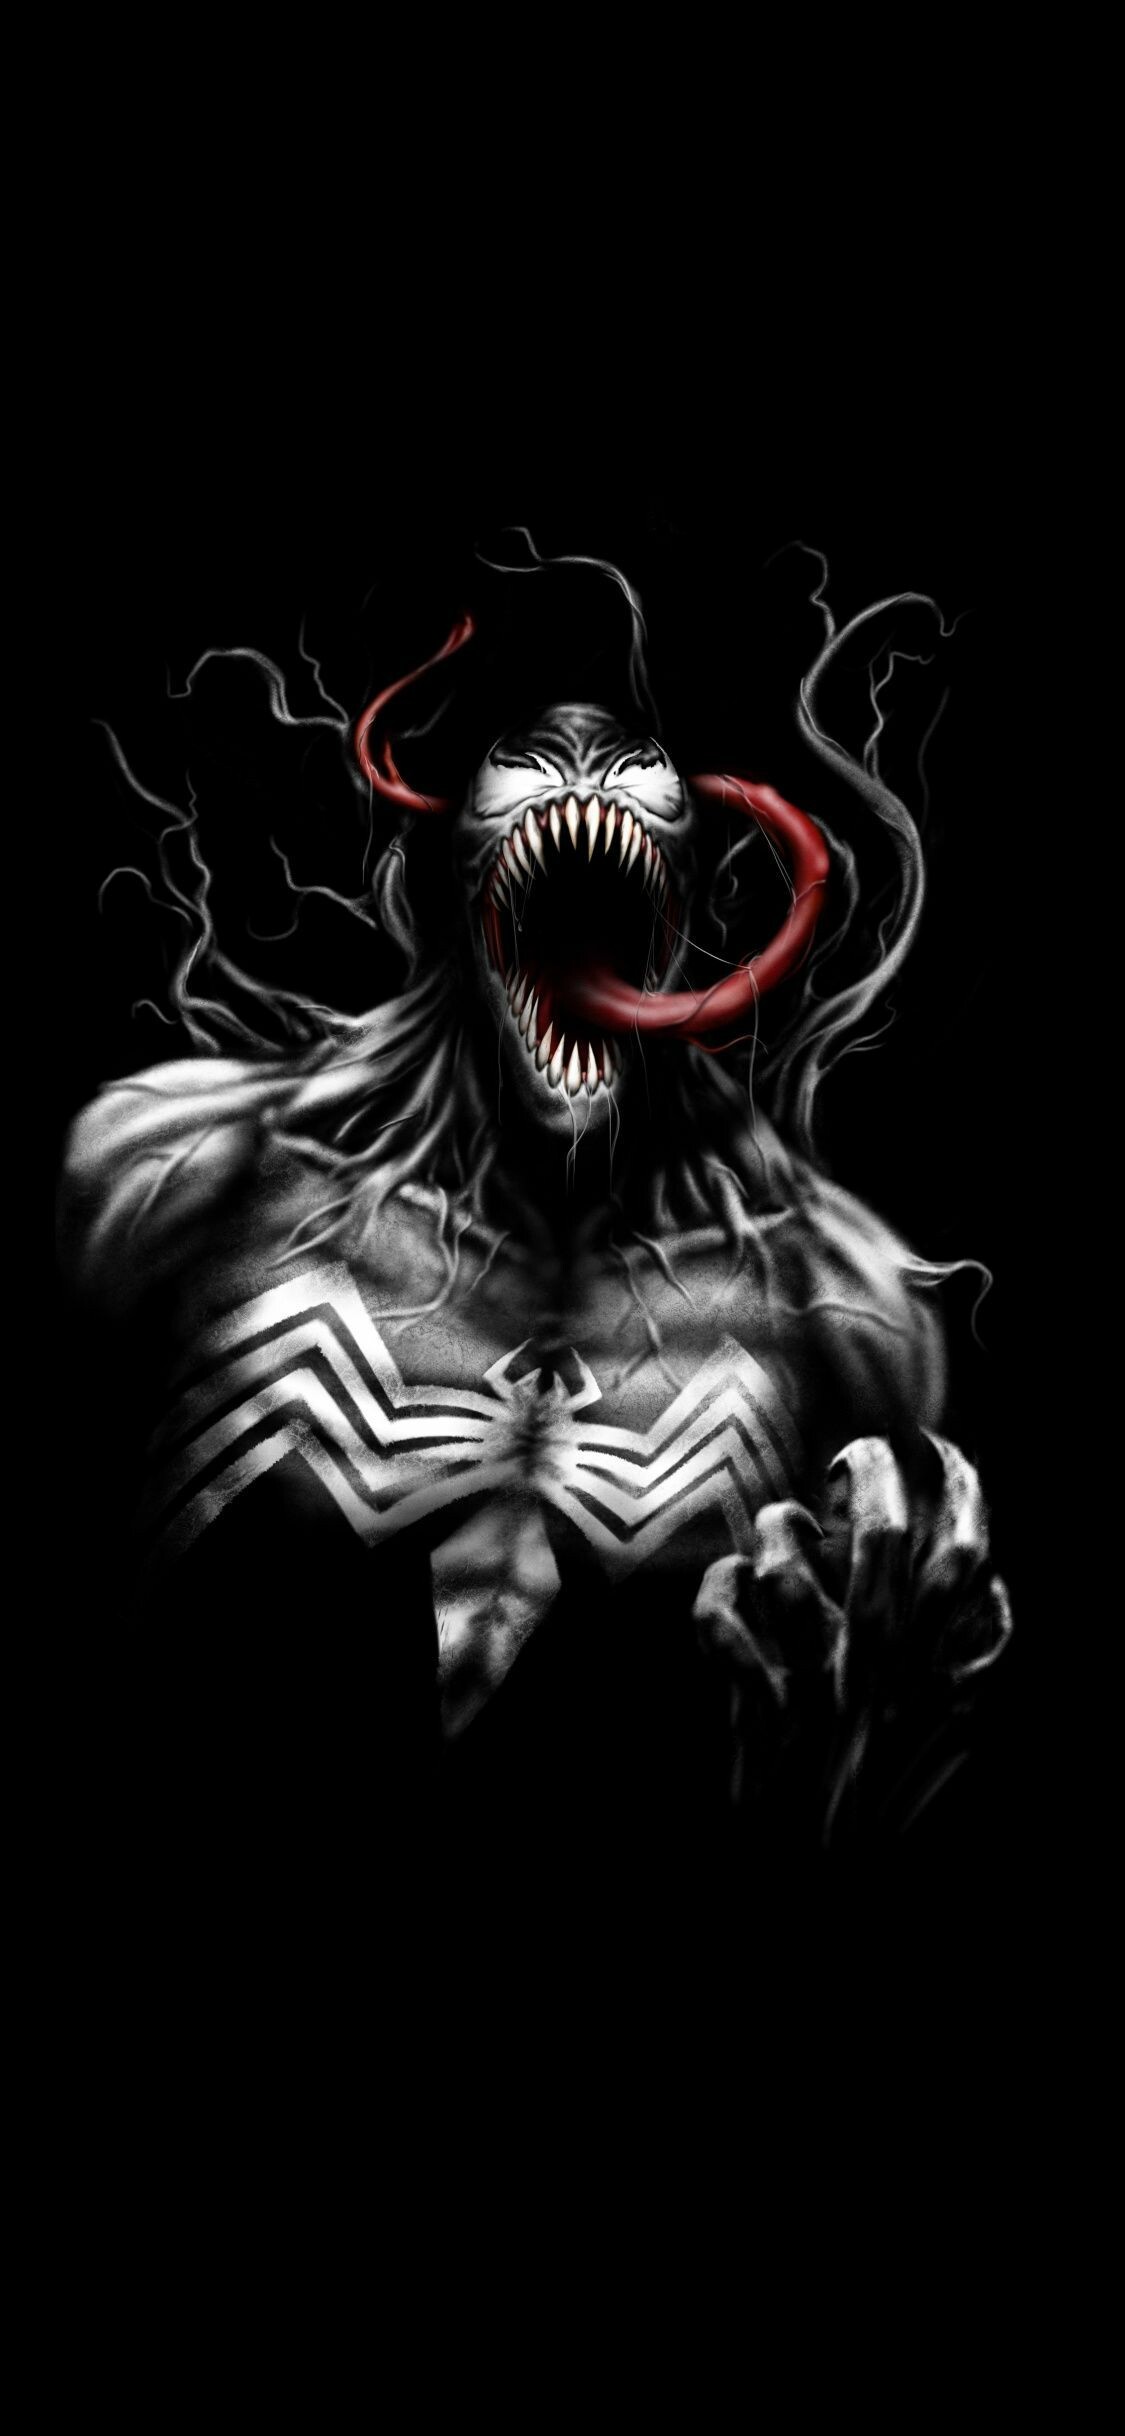 Marvel Villain: Venom, Sentient alien symbiote with an amorphous, liquid-like form, who survives by bonding with a host, usually human. 1130x2440 HD Background.